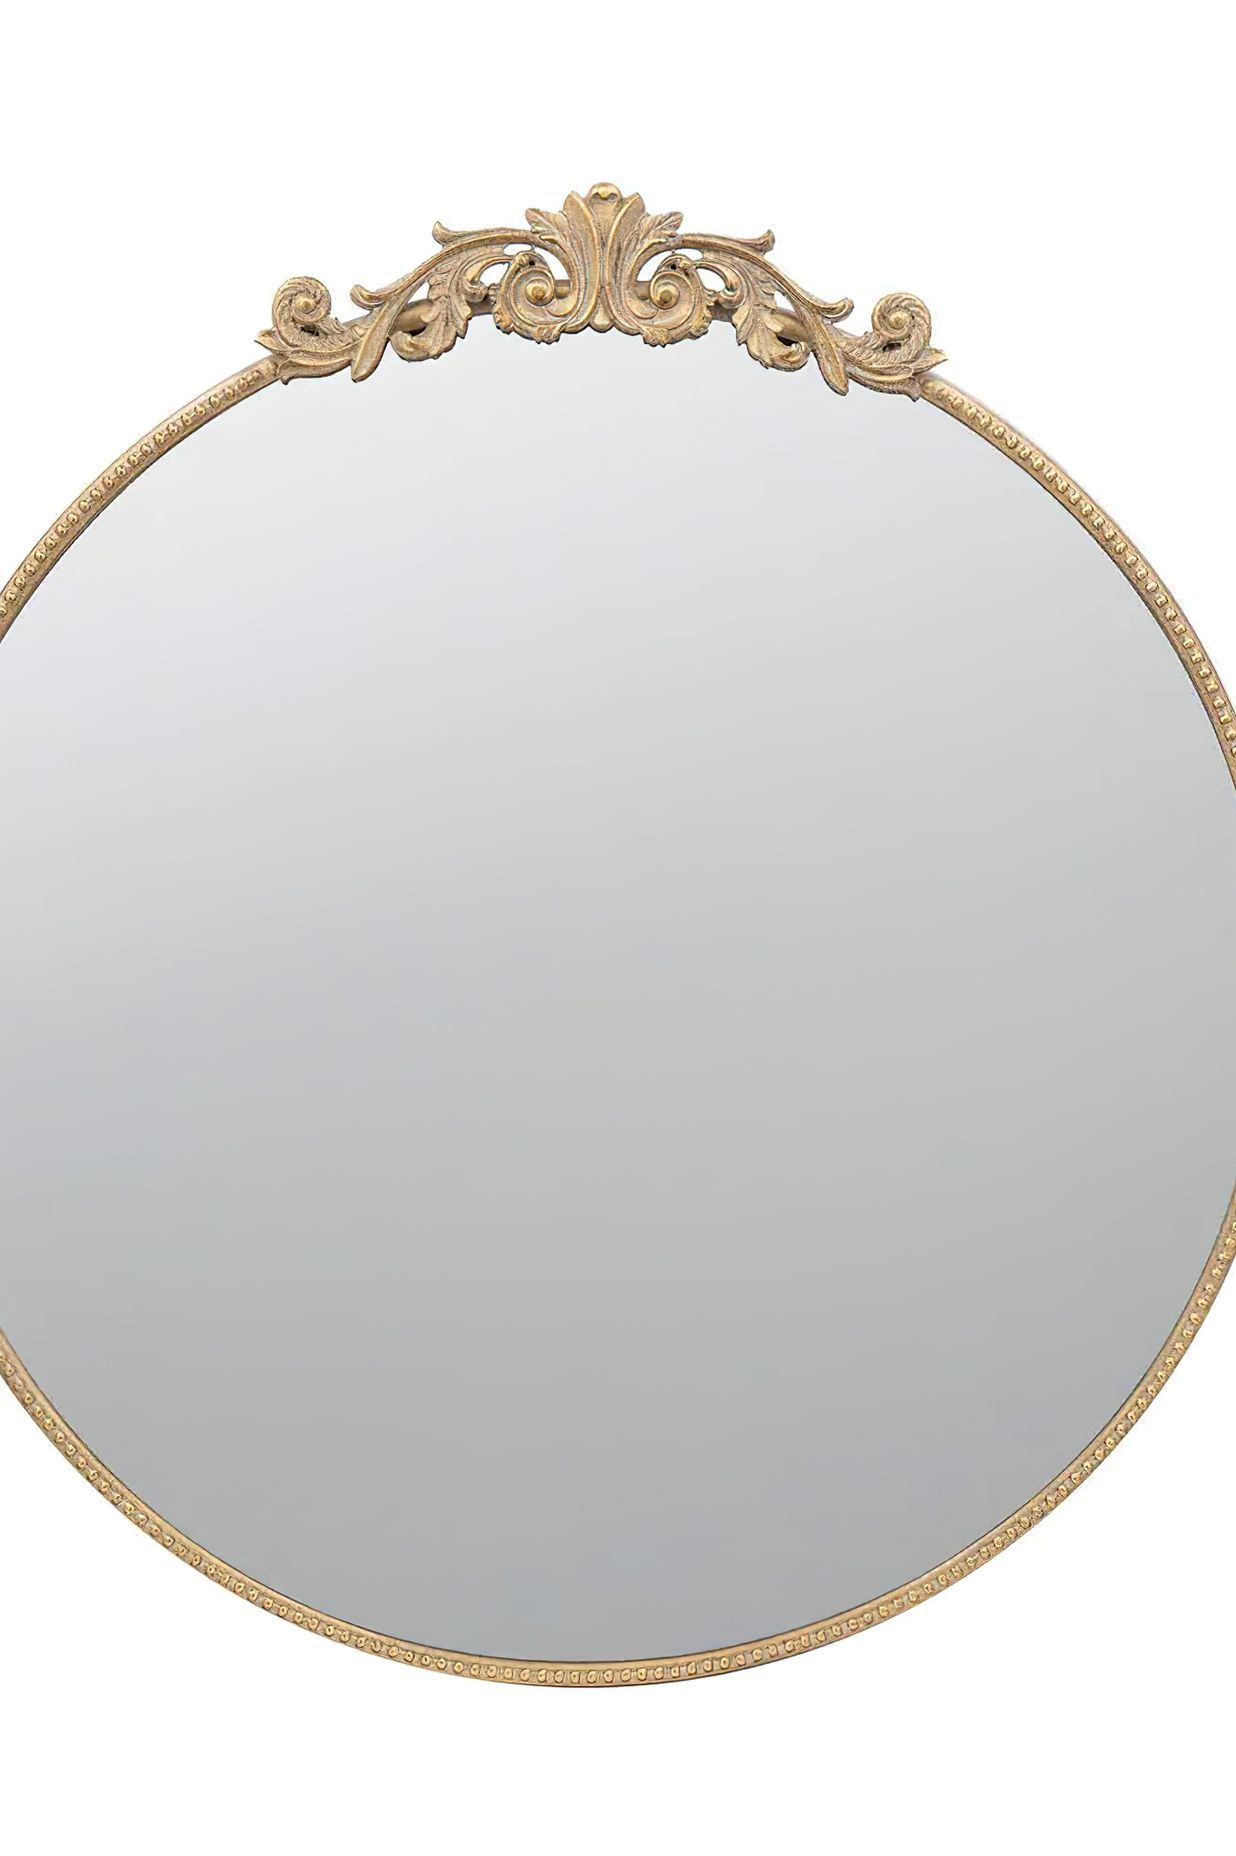 Emac &amp; Lawton ‘Dia’ round mirror by Pearl Lighting and Brassware